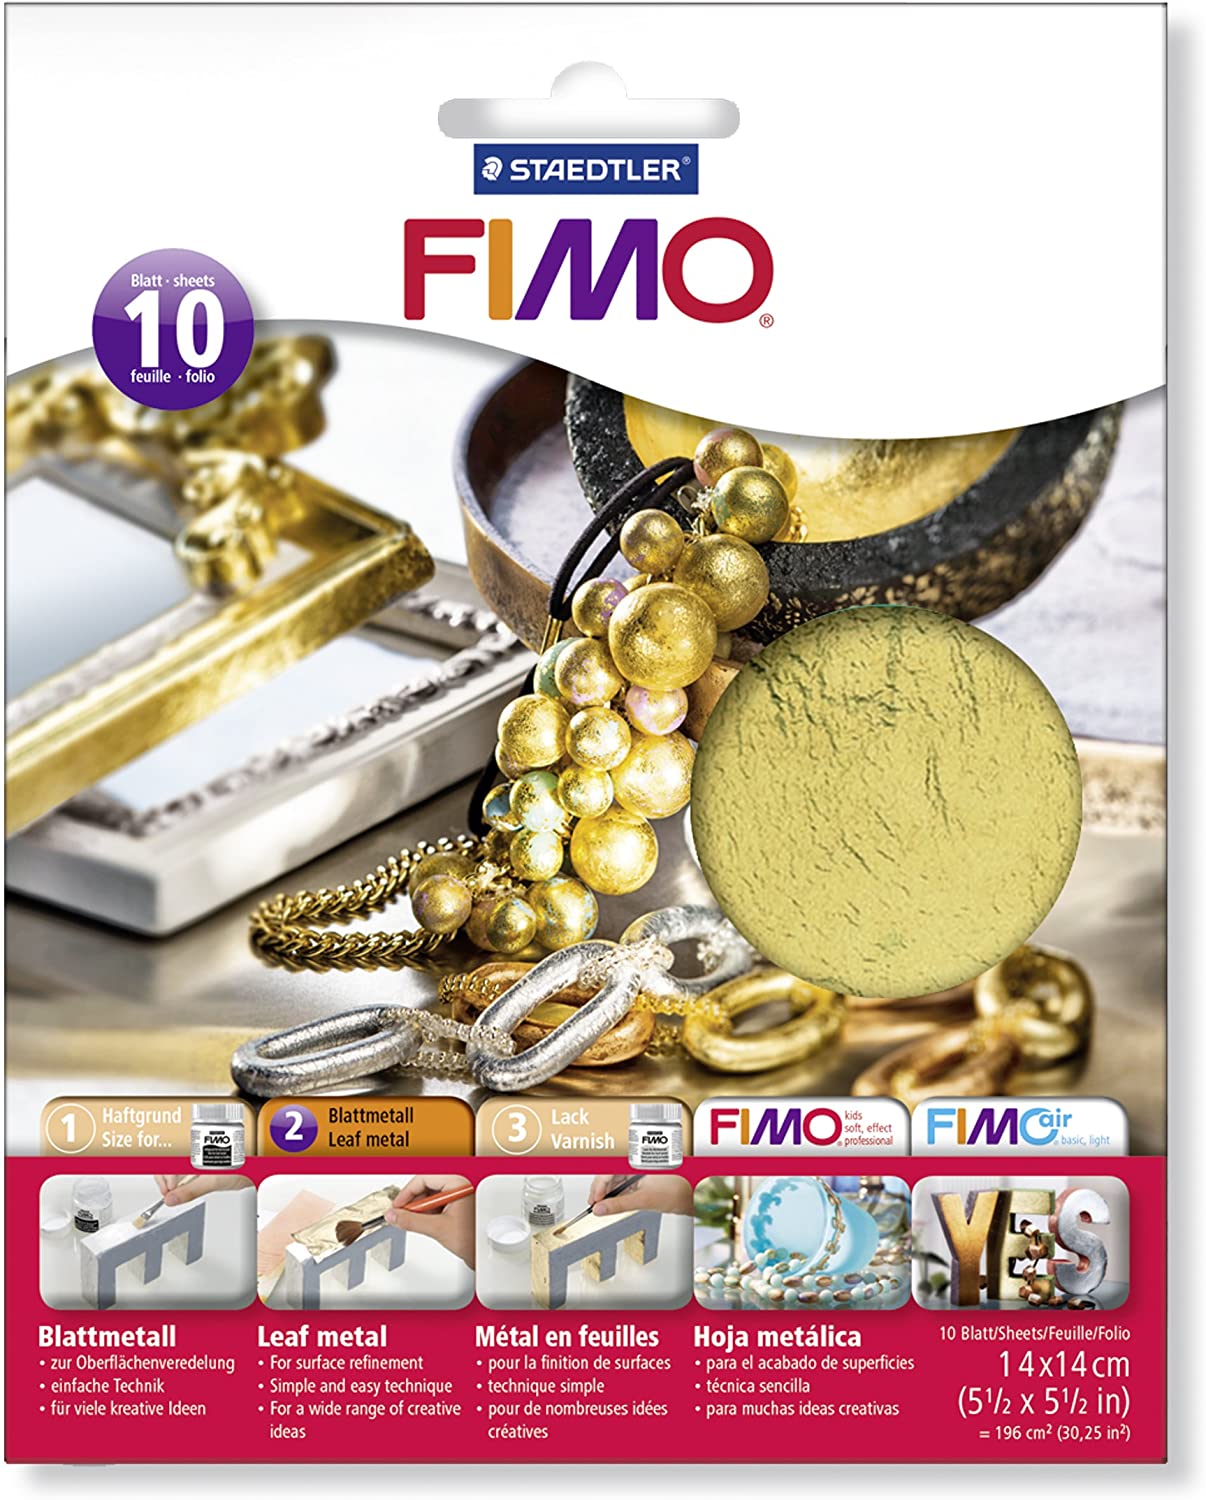 FIMO Air Drying Clay  PaperStory - The Great Little Art Shop